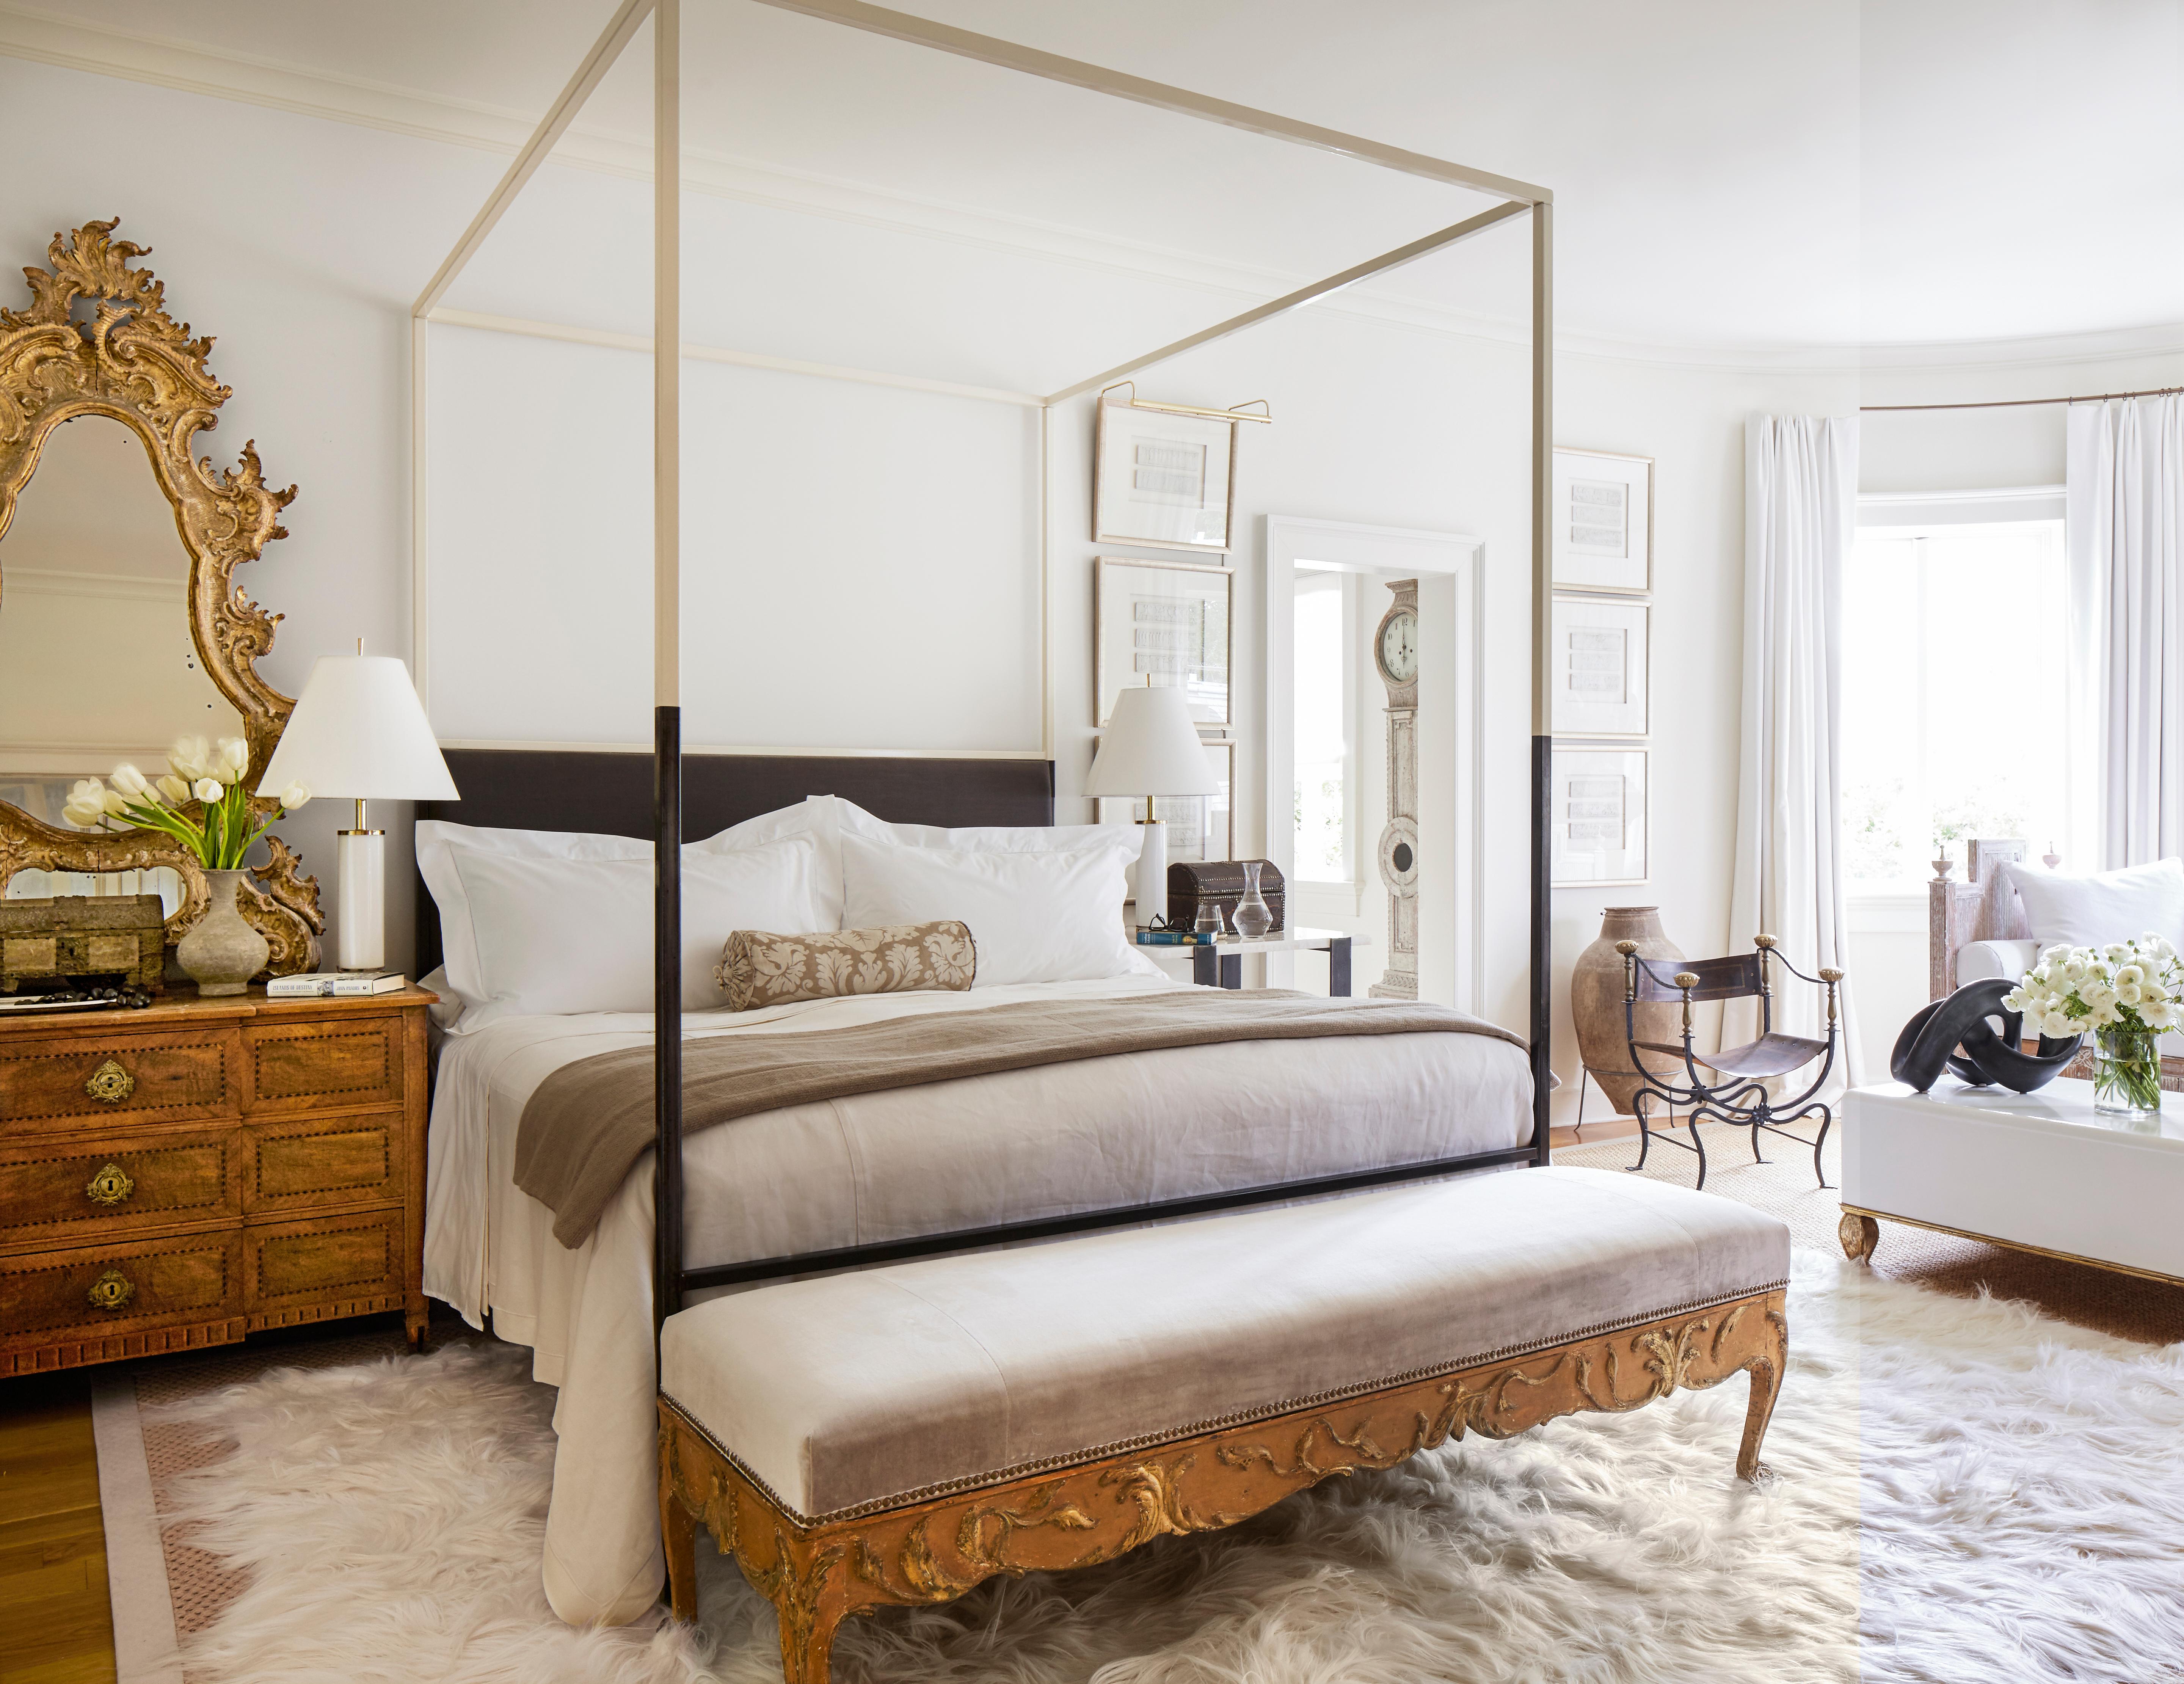 This ultra-sleek and streamlined two-tone canopy bed with upholstered headboard from the custom Tara Shaw Maison collection has been featured in several shelter magazines, including Veranda and Architectural Digest. Handcrafted in New Orleans. The